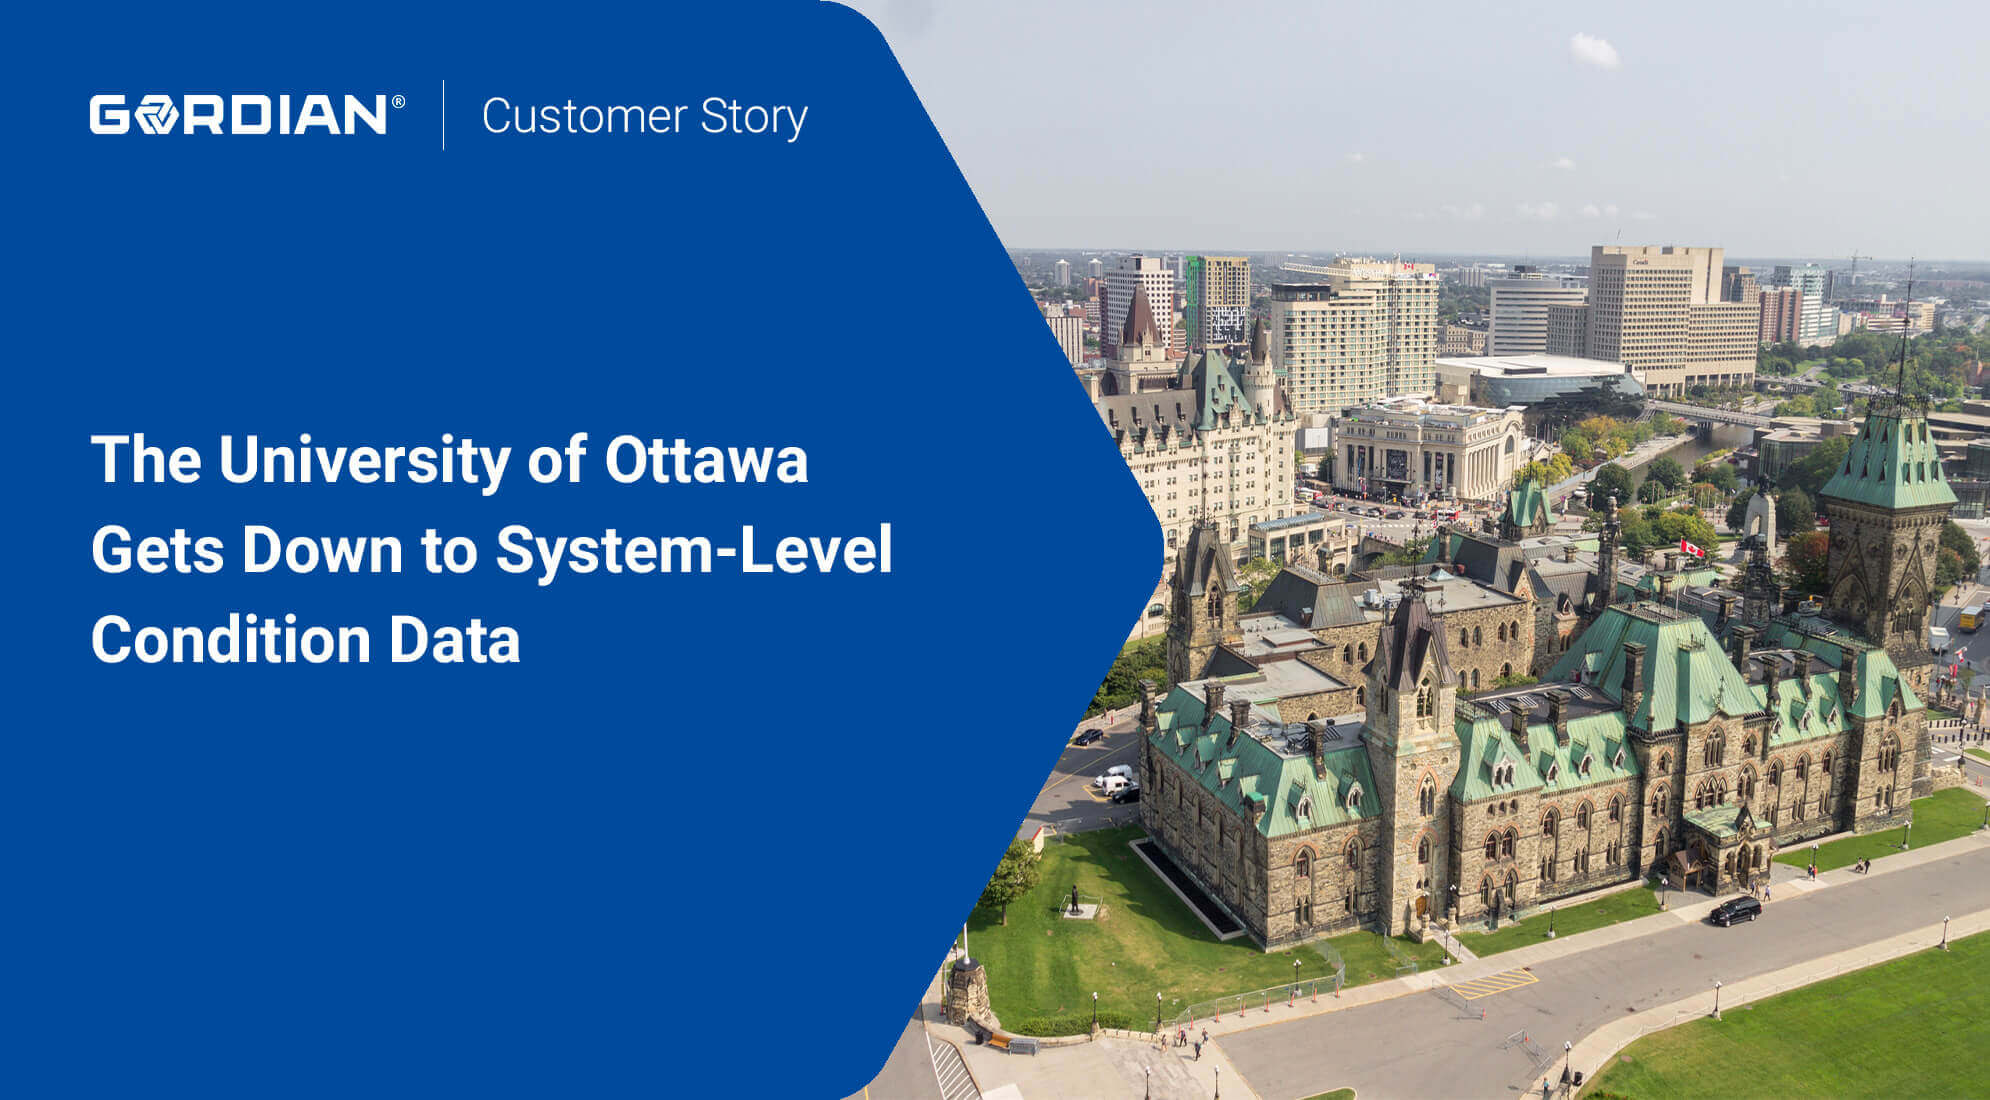 The University of Ottawa Gets Down to System-Level Condition Data